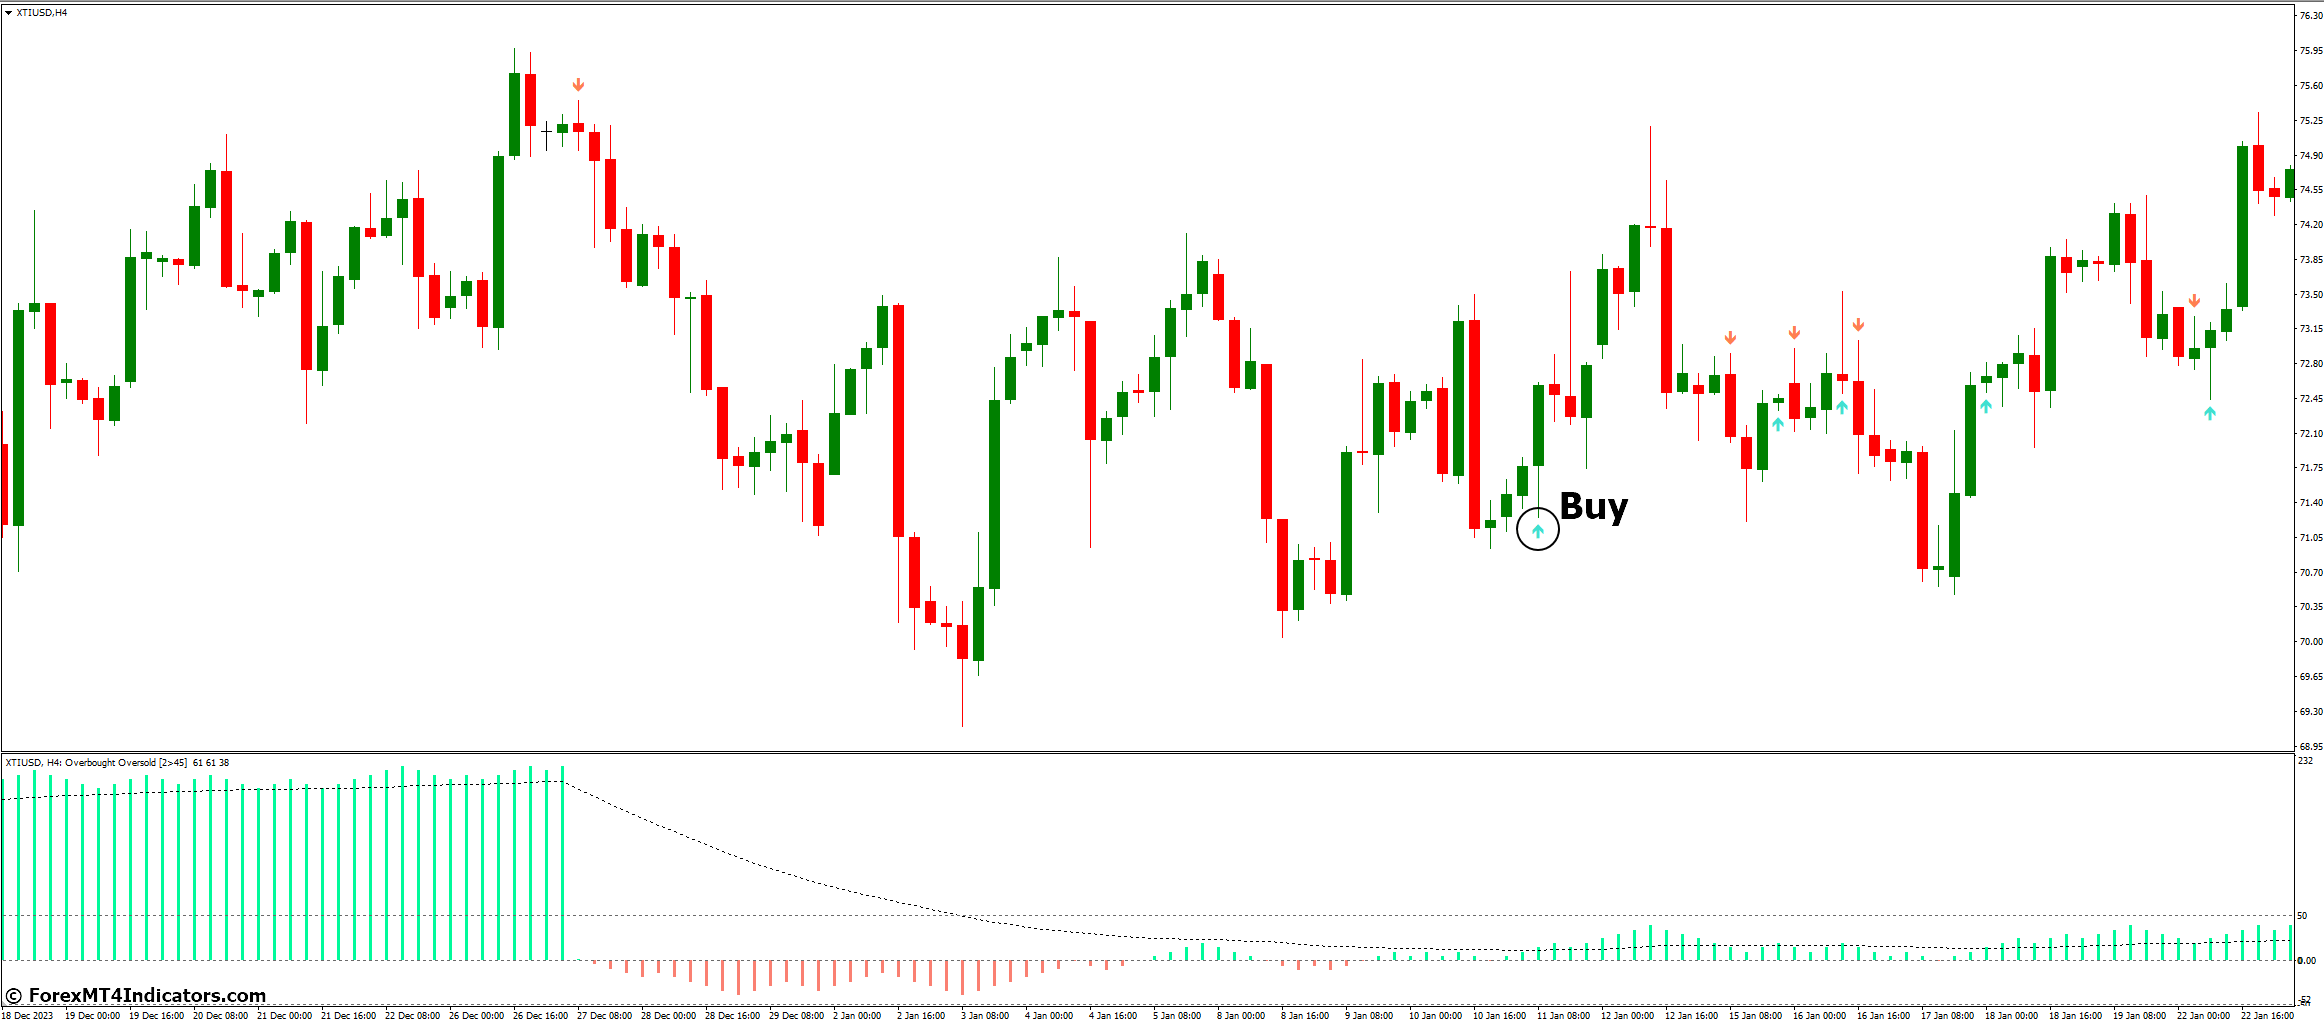 How to Trade with Overbought and Oversold Indicator - Buy Entry